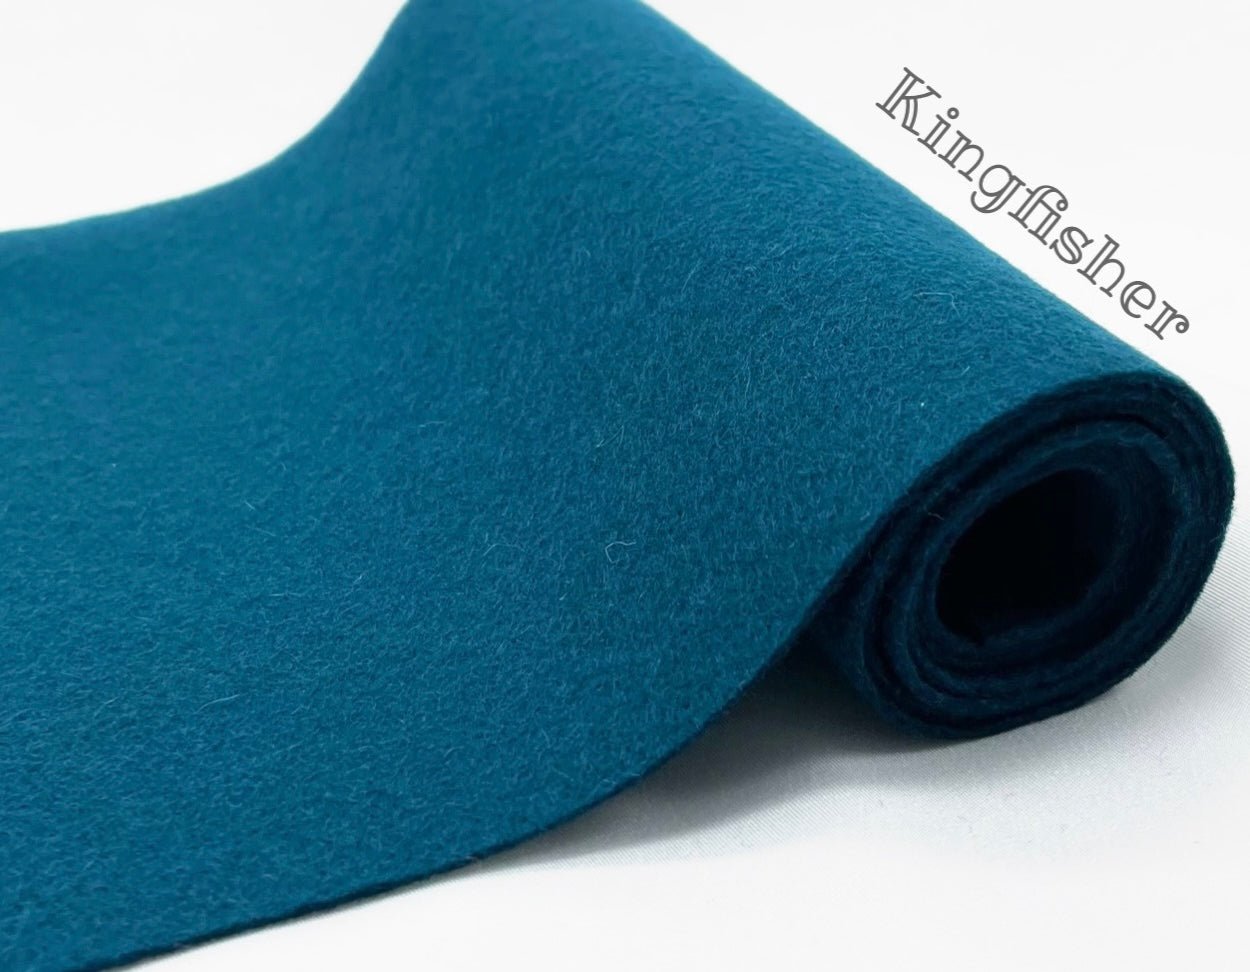 National Nonwovens Peacock Blue Turquoise - Wool Felt Oversized Sheet - 20% Wool Blend - 36 in x 36 in Sheet